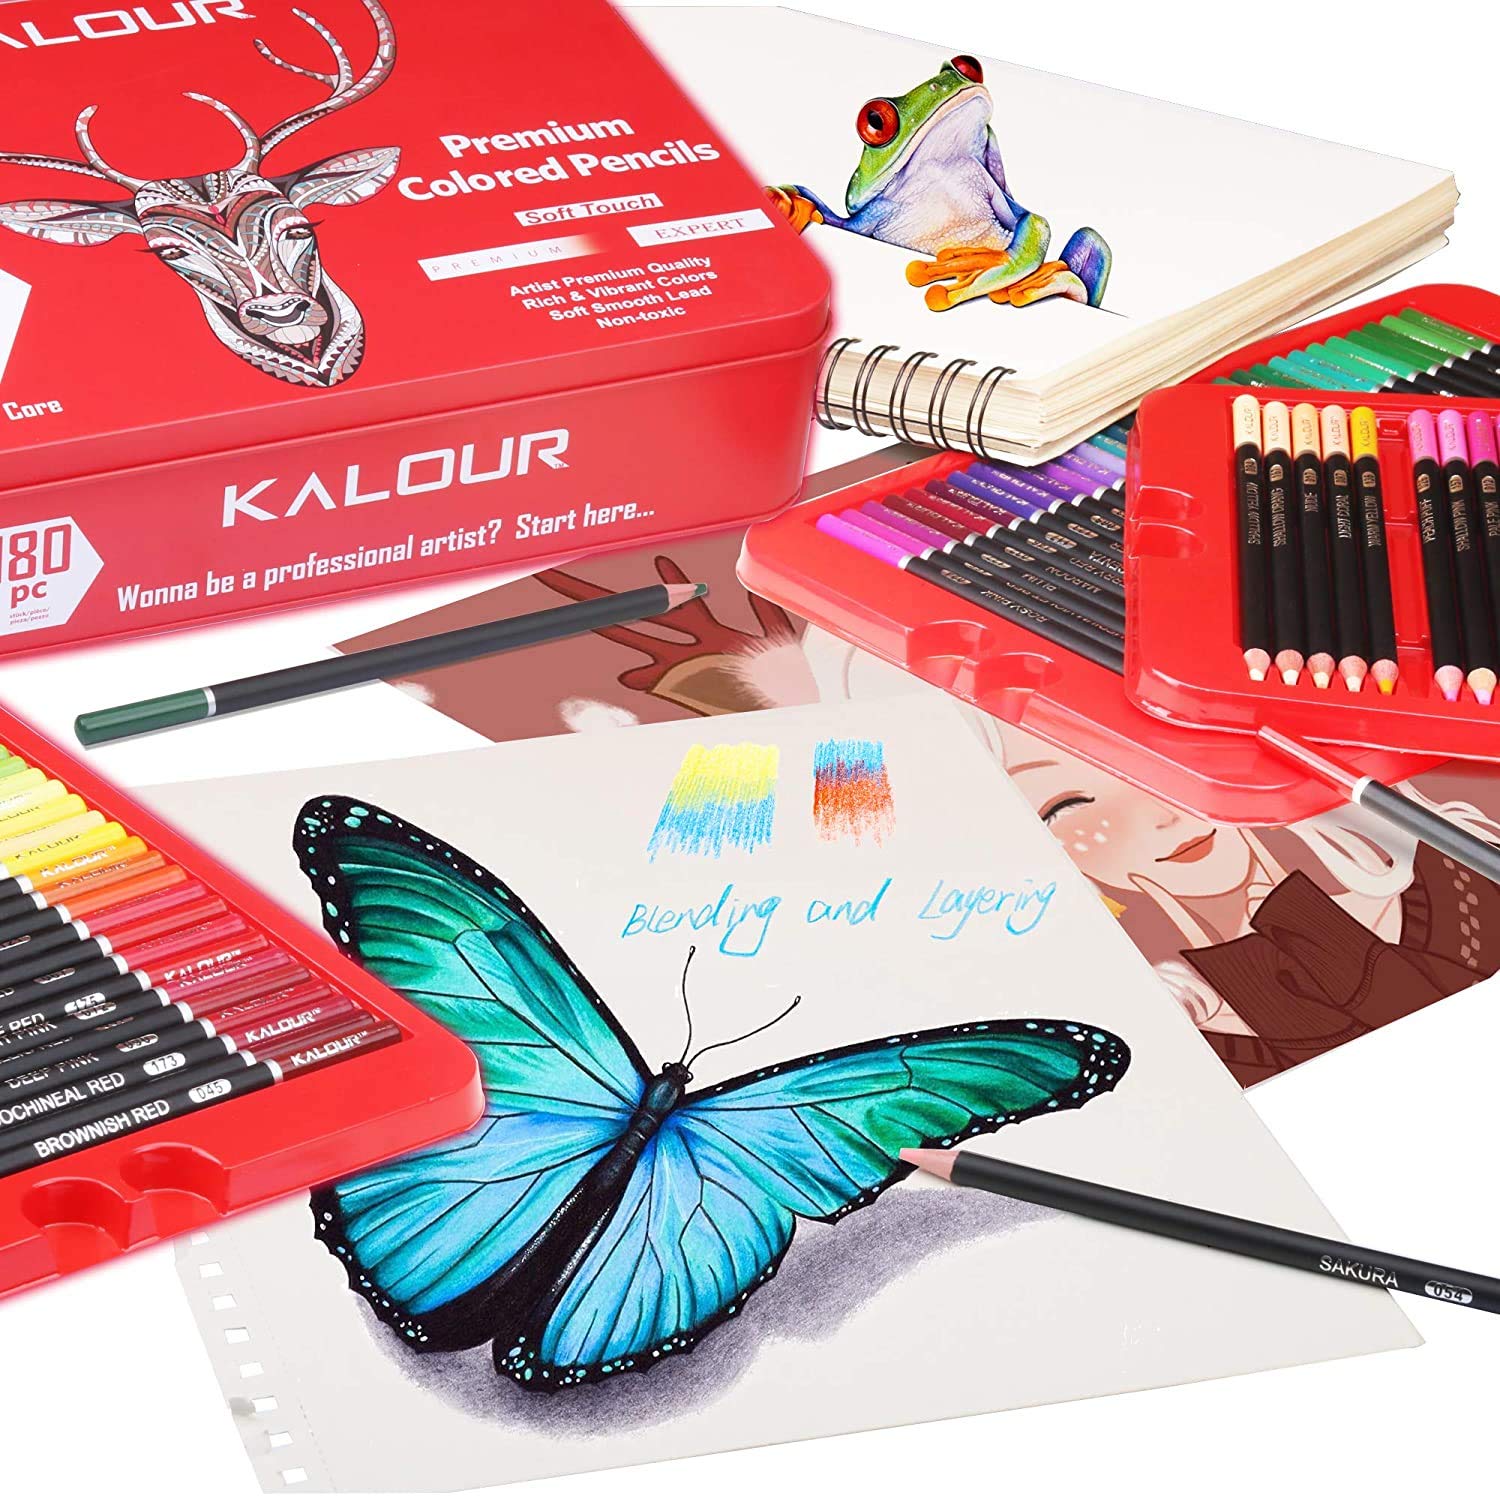 Sabahz Trading Kalour 180 Premium Colored Pencil Set For Adult Coloring -  Artists Soft Core Drawing Pencils- Ideal For Sketching Shading Blending  Crafting - Gift Tin Box 